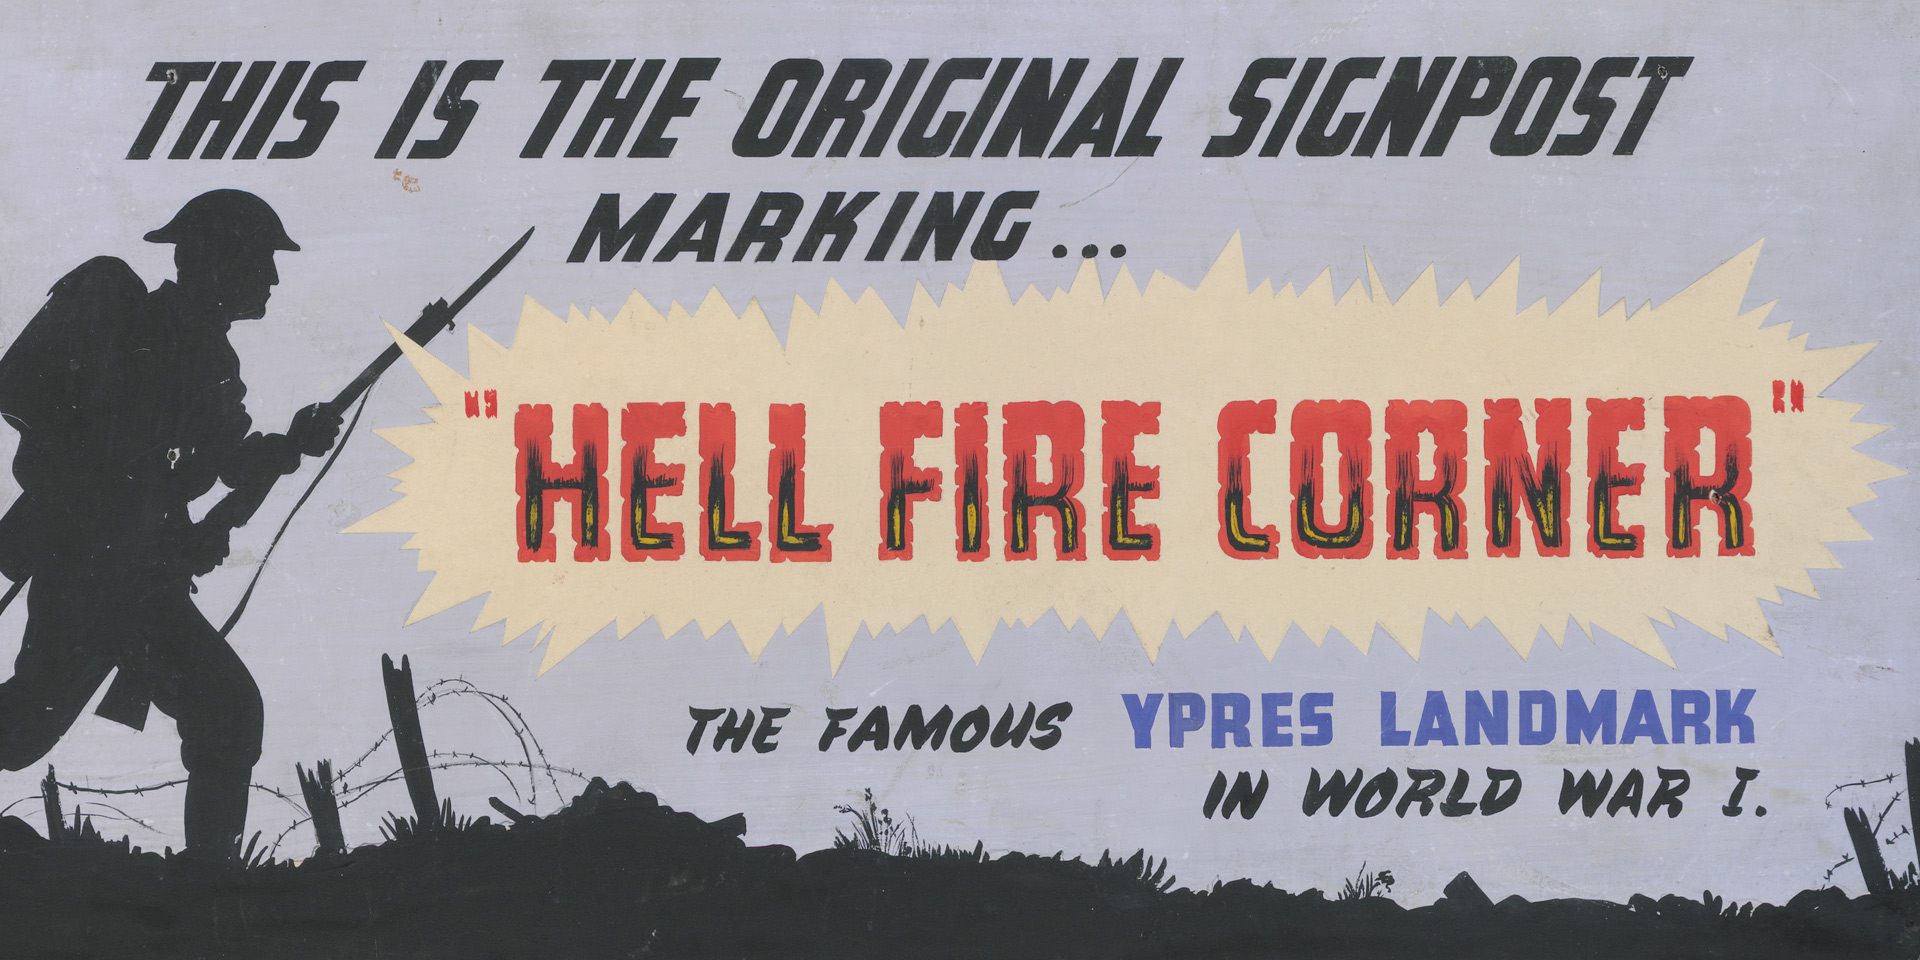 Advertising board used in Storie’s shop to publicise the Hellfire Corner sign, c1950